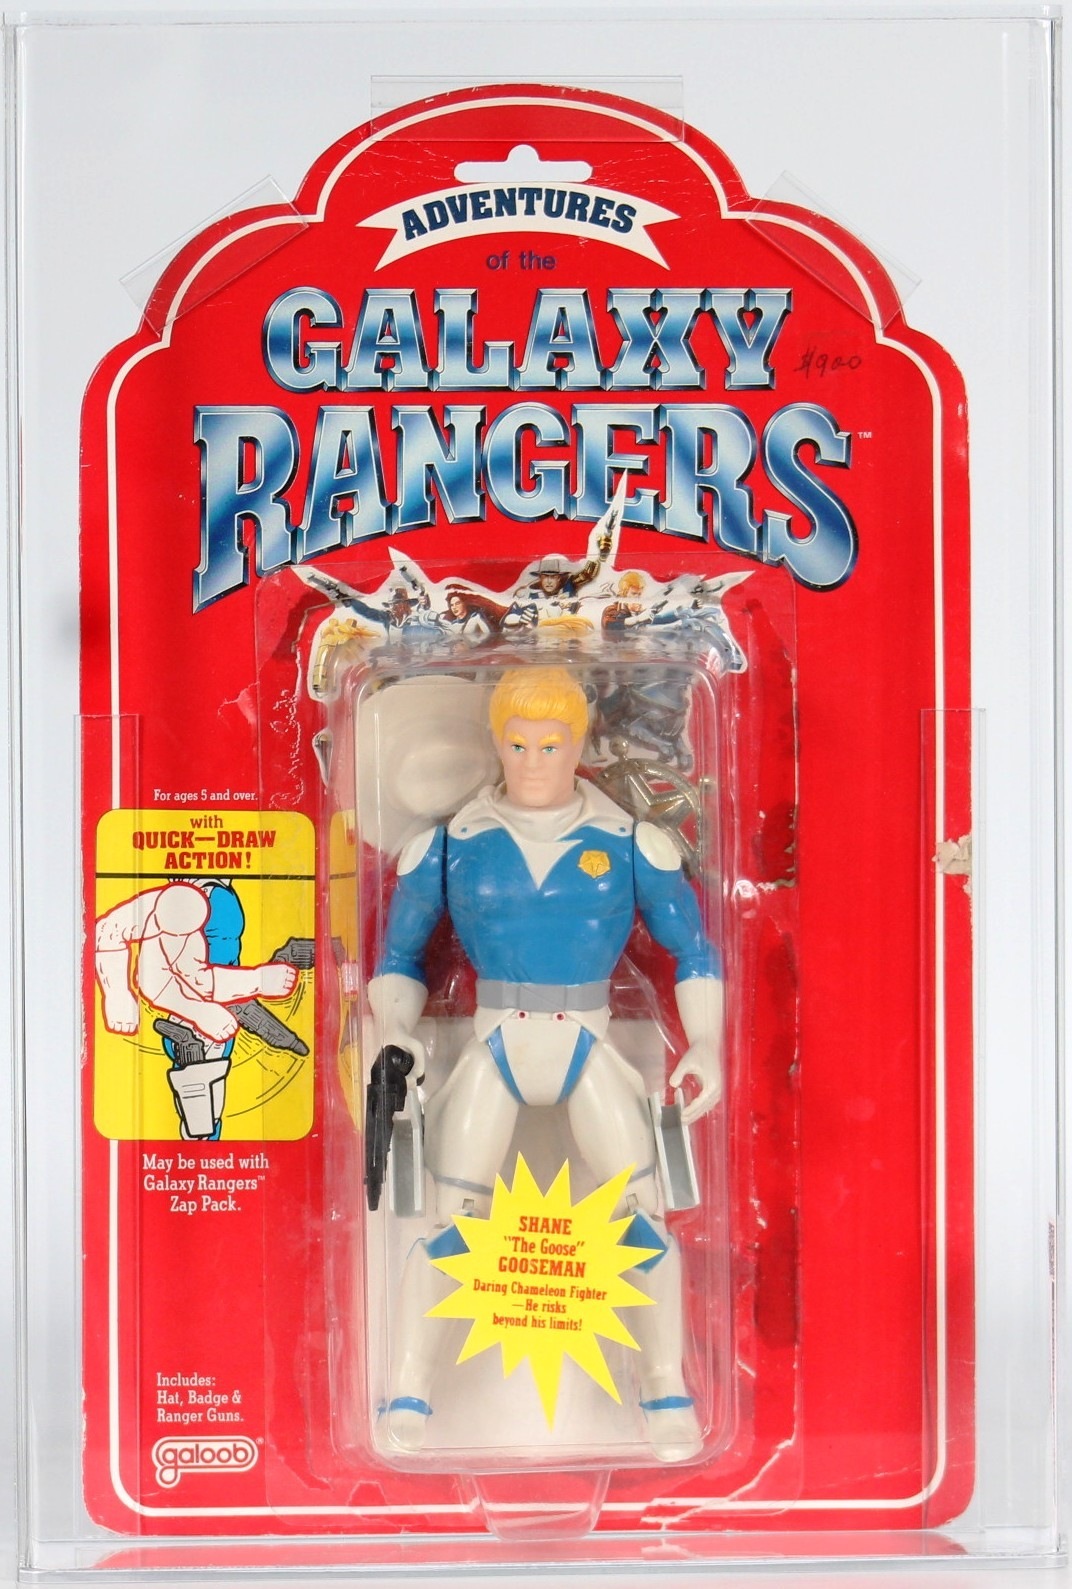 1986 Galoob Galaxy Rangers Carded Action Figure - Shane 'The Goose' Gooseman